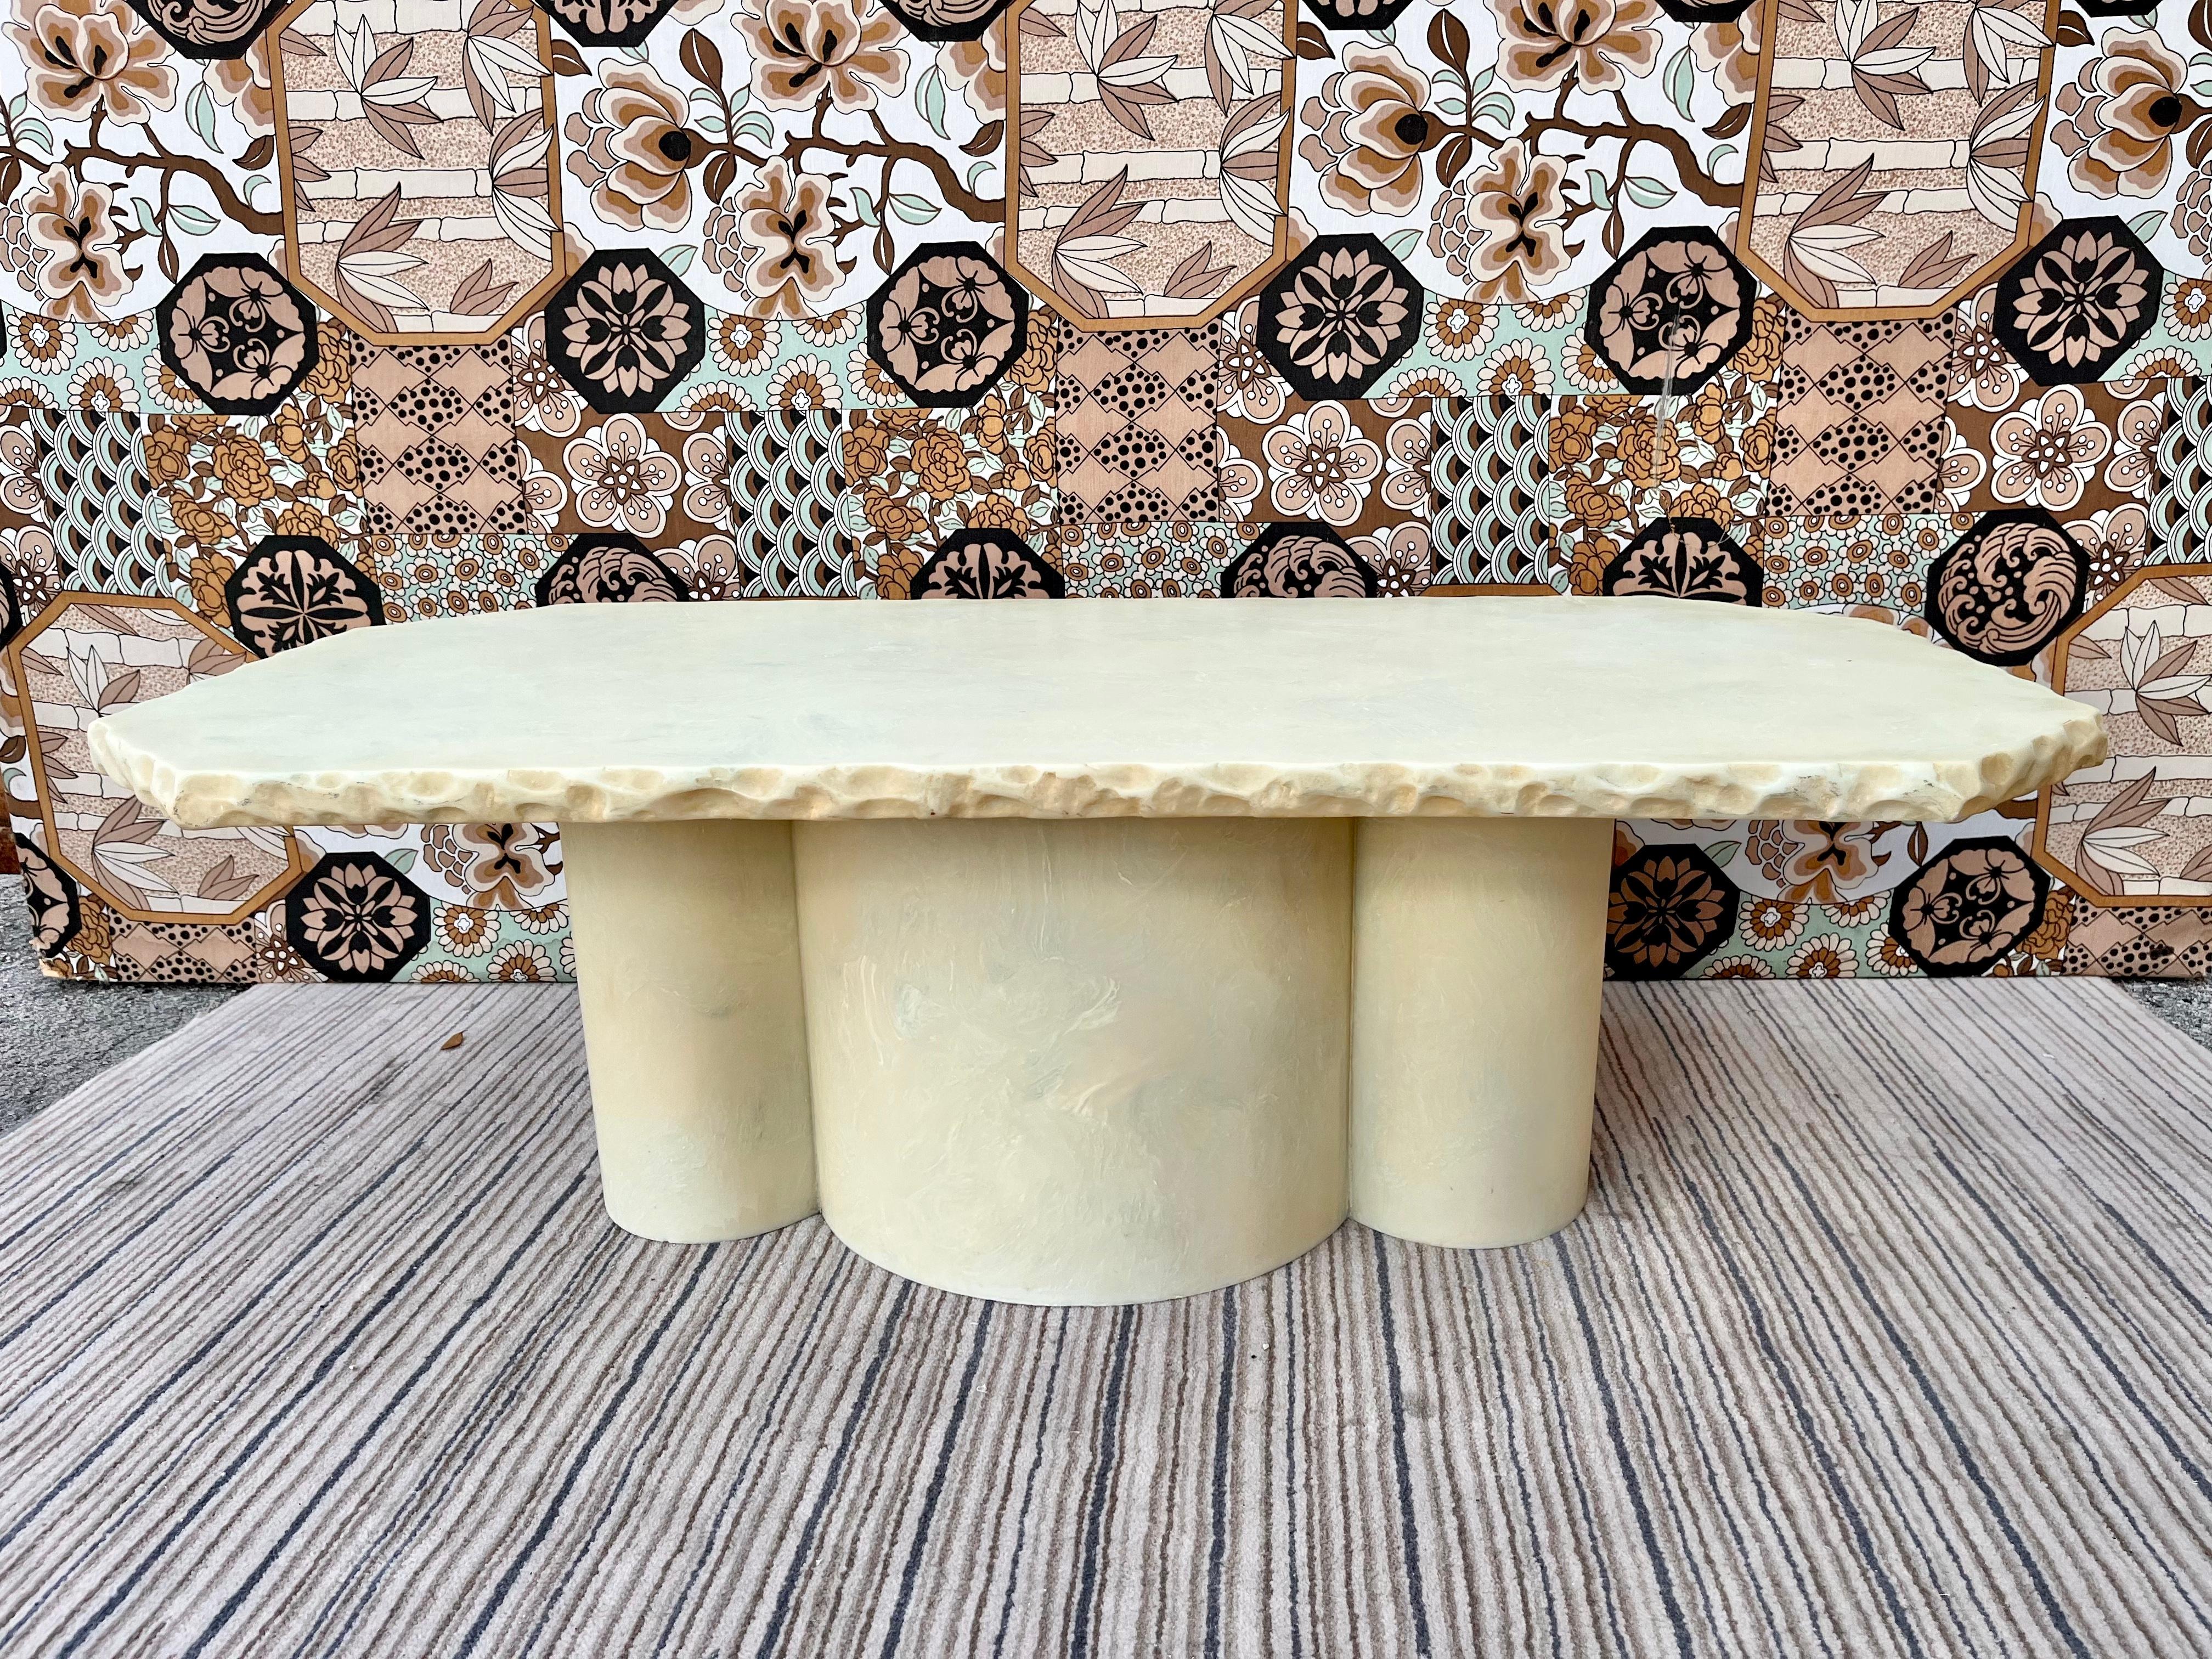 Late 20th Century Postmodern Faux Marble Resin coffee / cocktail table. Circa 1980s
Probably one of a kind, this handcrafted coffee or cocktail table features a green-yellowish tones marbleized appearance with raw or rough edges all around. The top